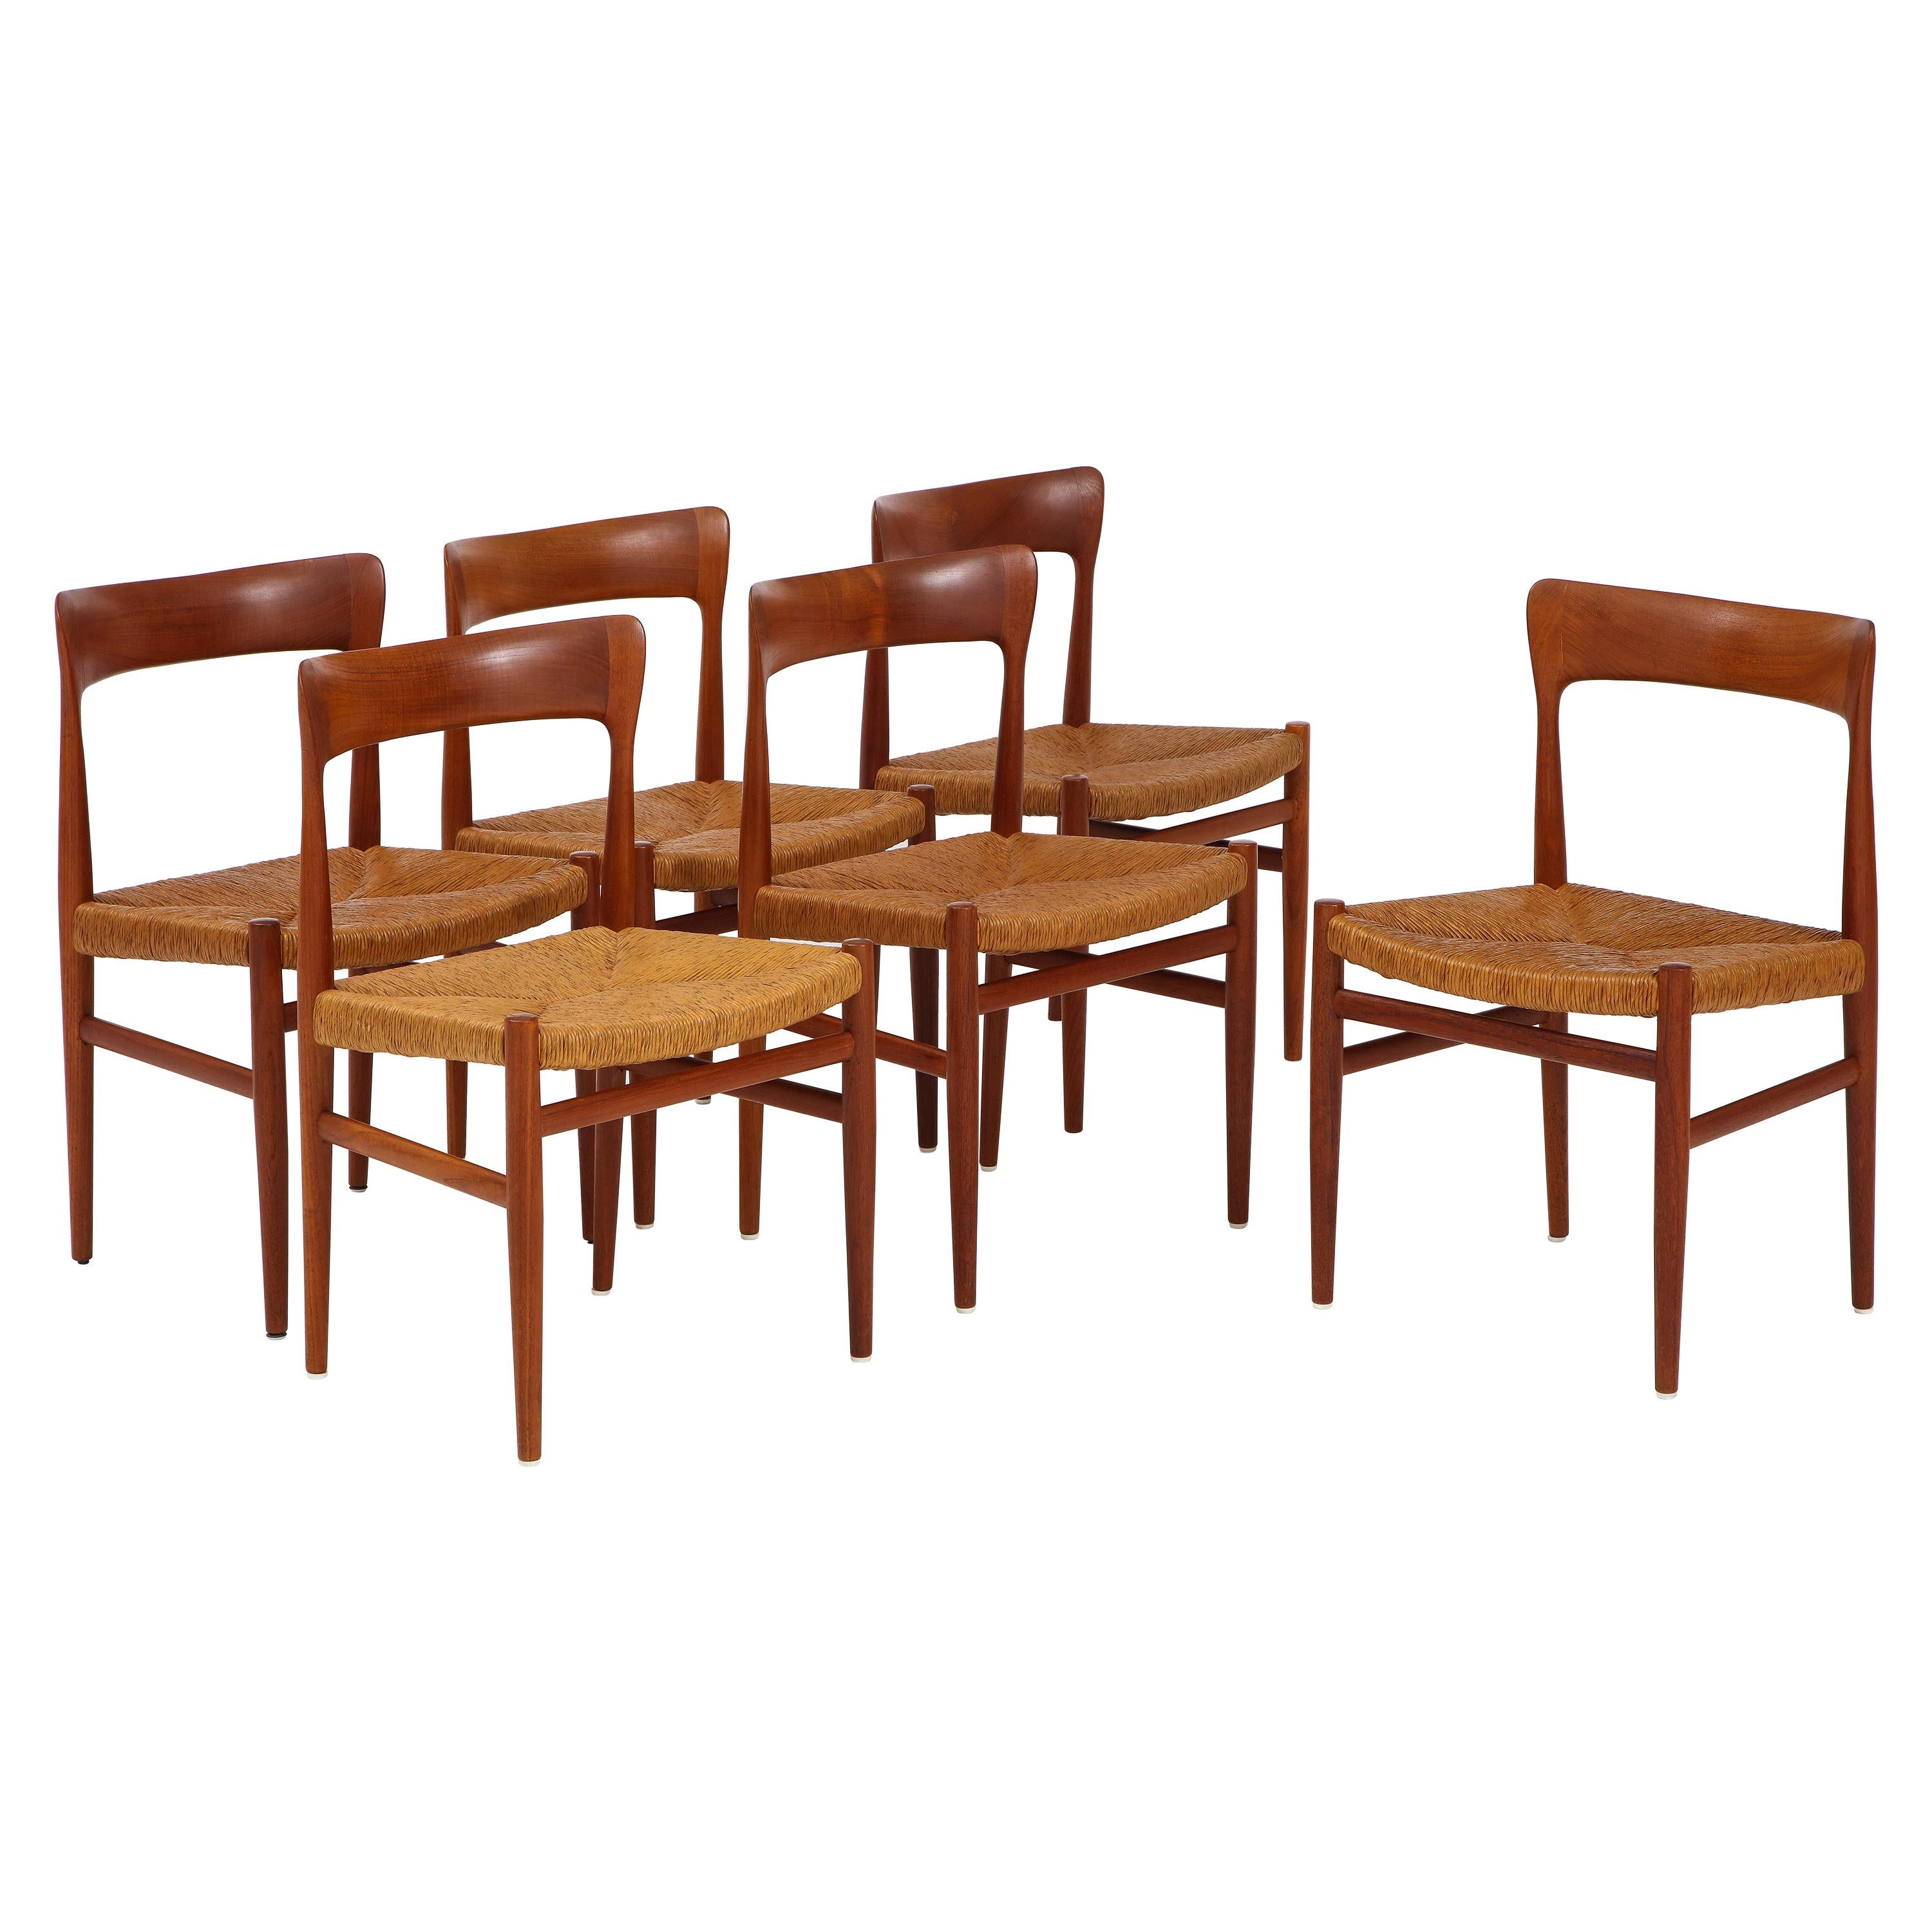 1950s Danish Teak Modernist Dining Chairs with Paper Cord Seats